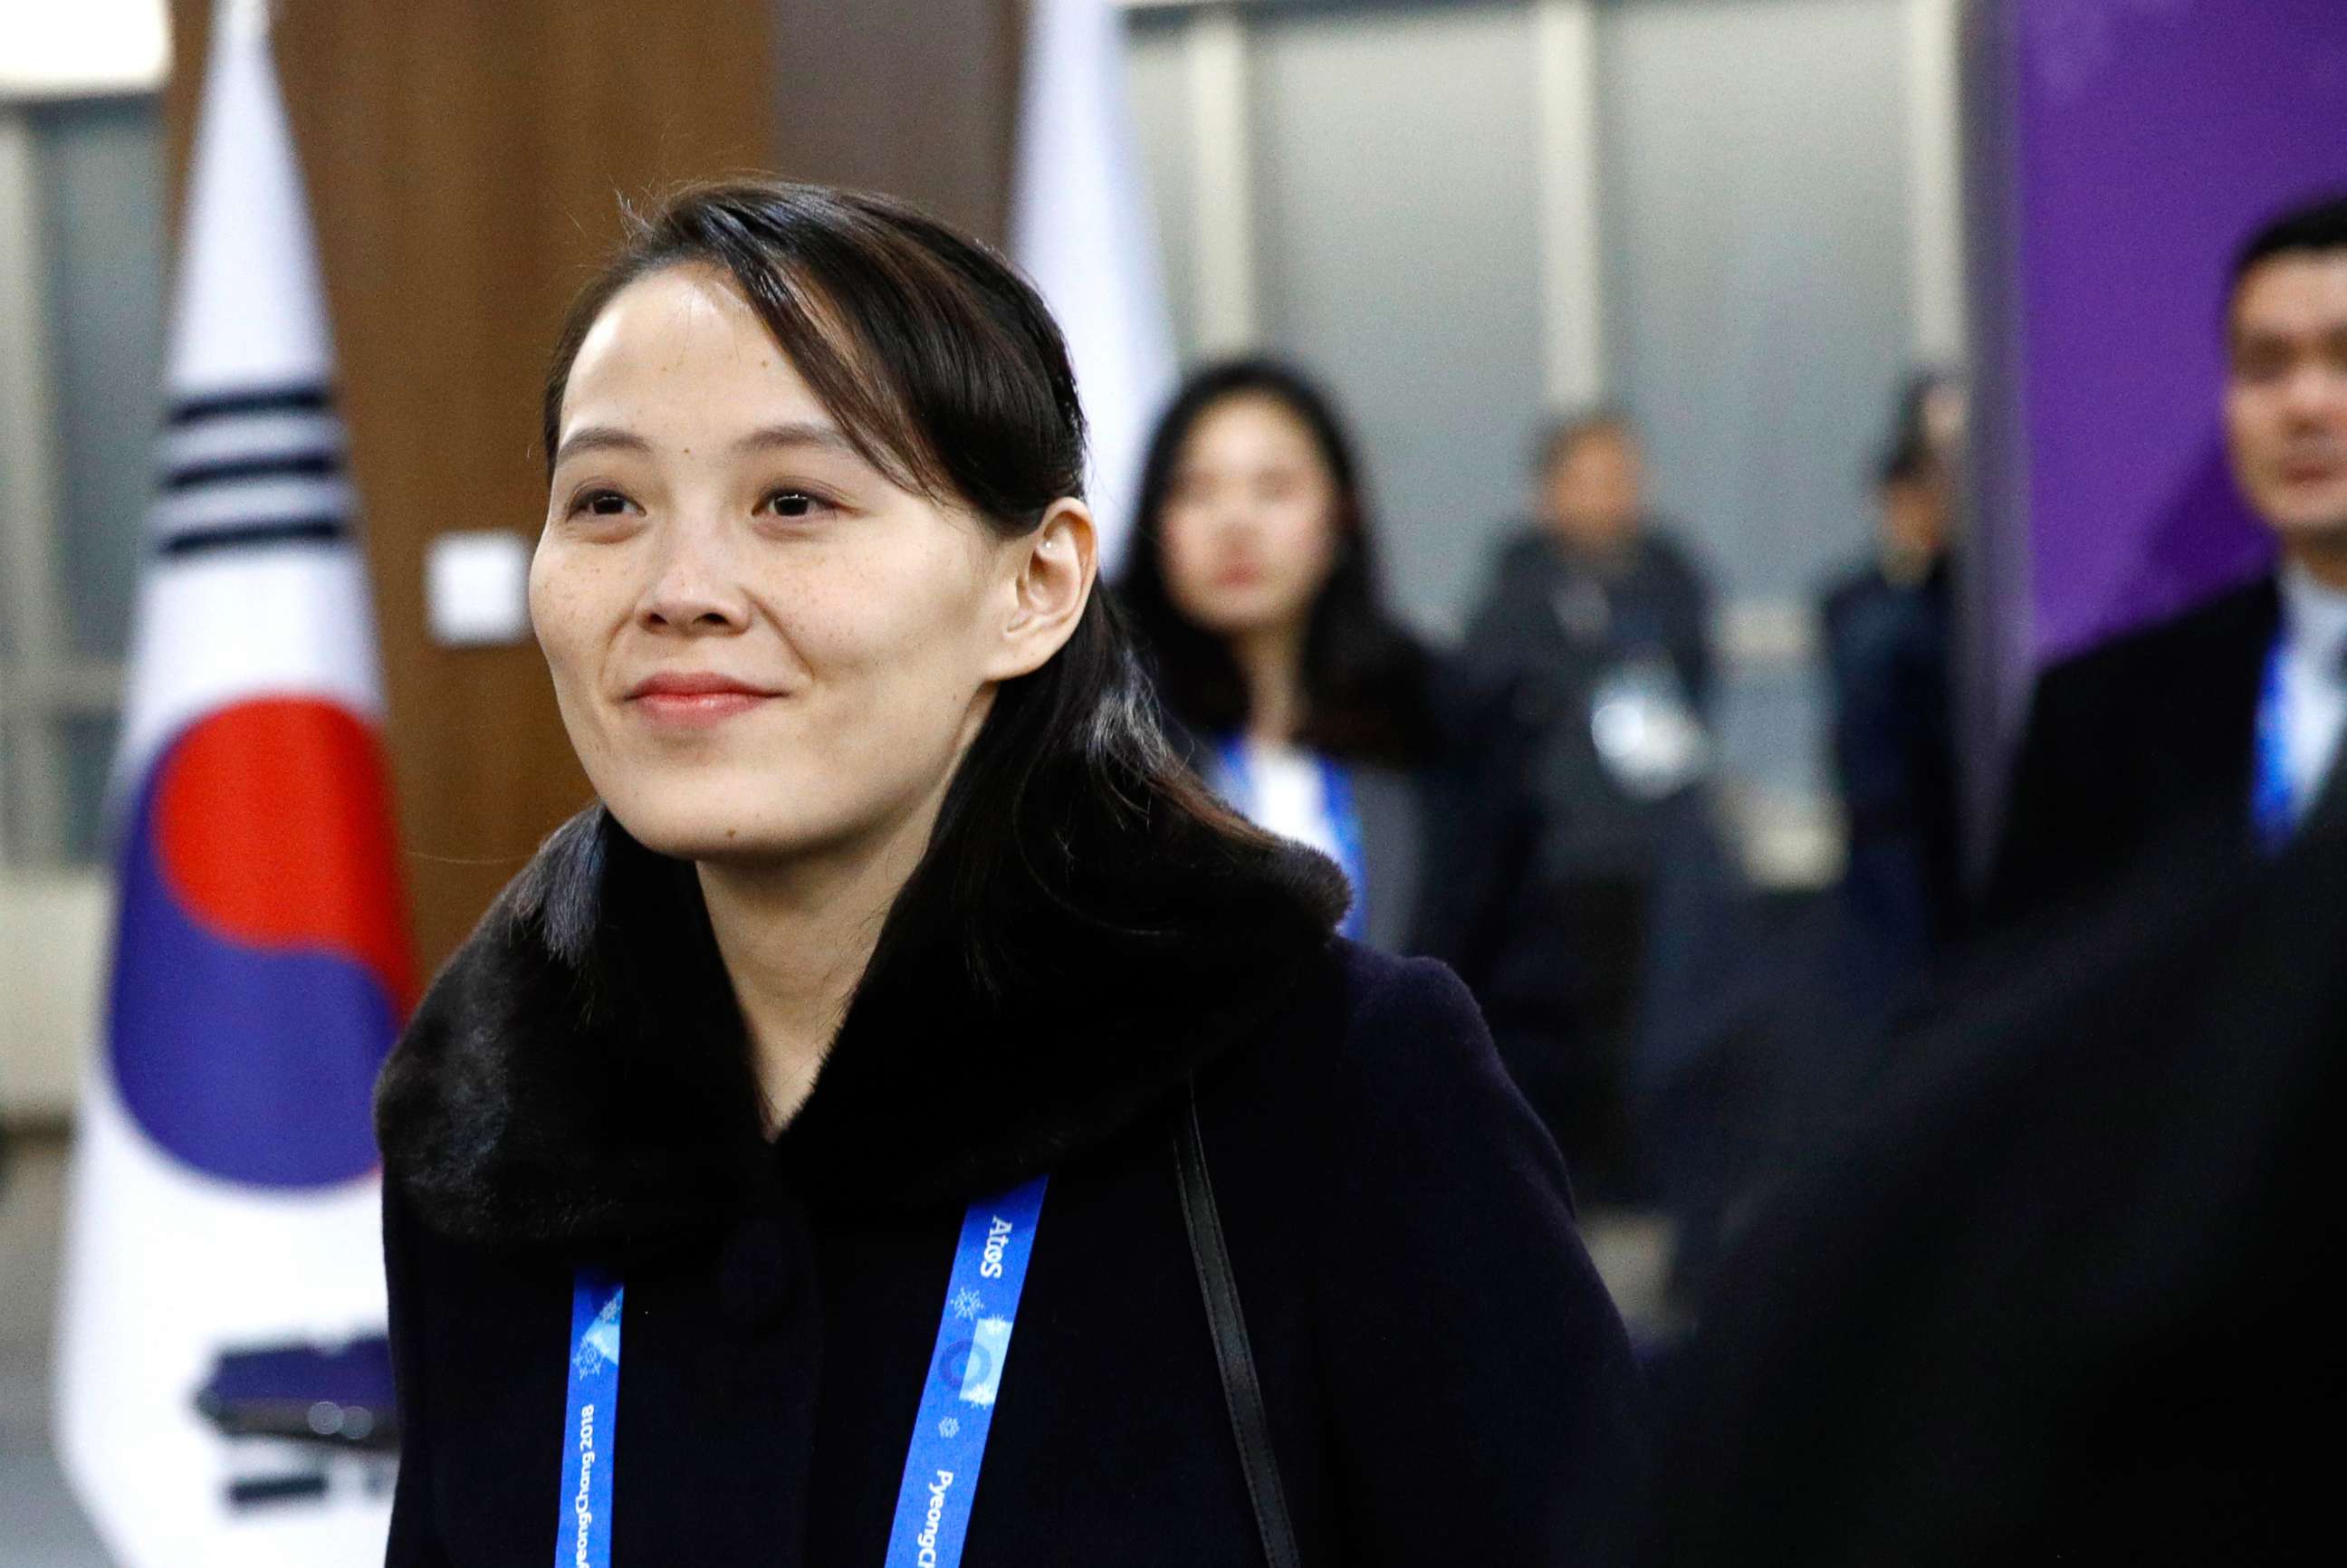 PHOTO: In this file photo, North Korea's Kim Jong Un's sister Kim Yo Jong arrives for the opening ceremony of the Pyeongchang 2018 Winter Olympic Games at the Pyeongchang Stadium, Feb. 9, 2018.